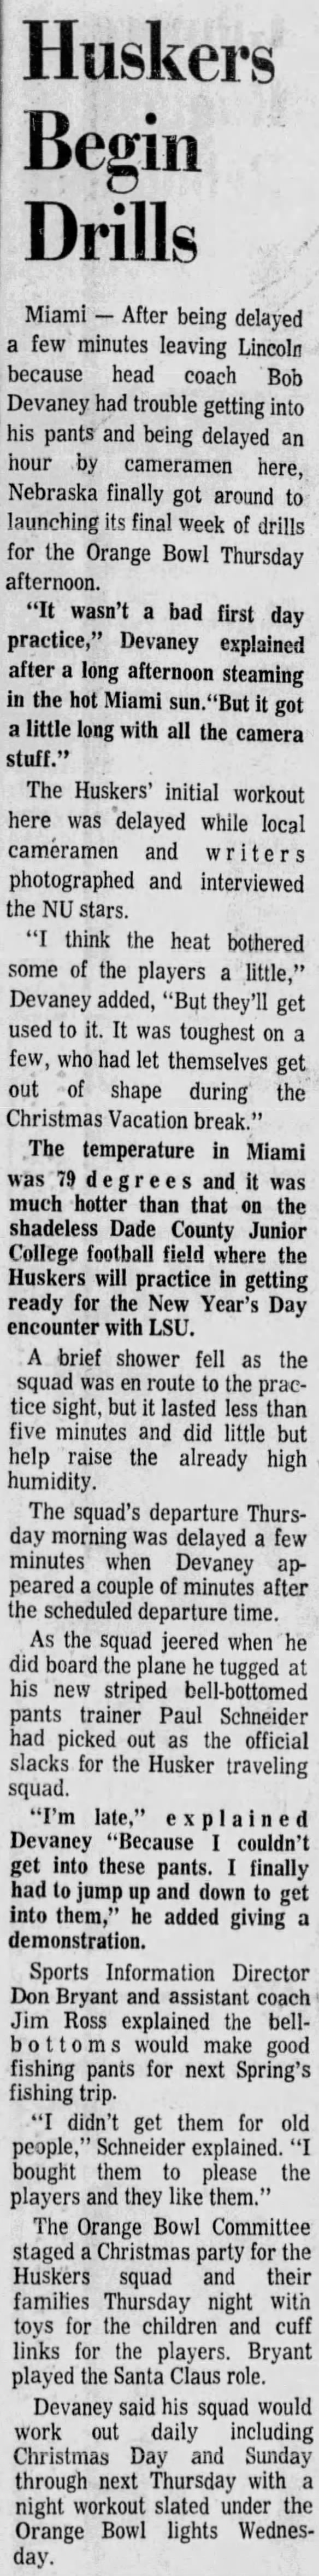 1970.12.24 First practice in Miami